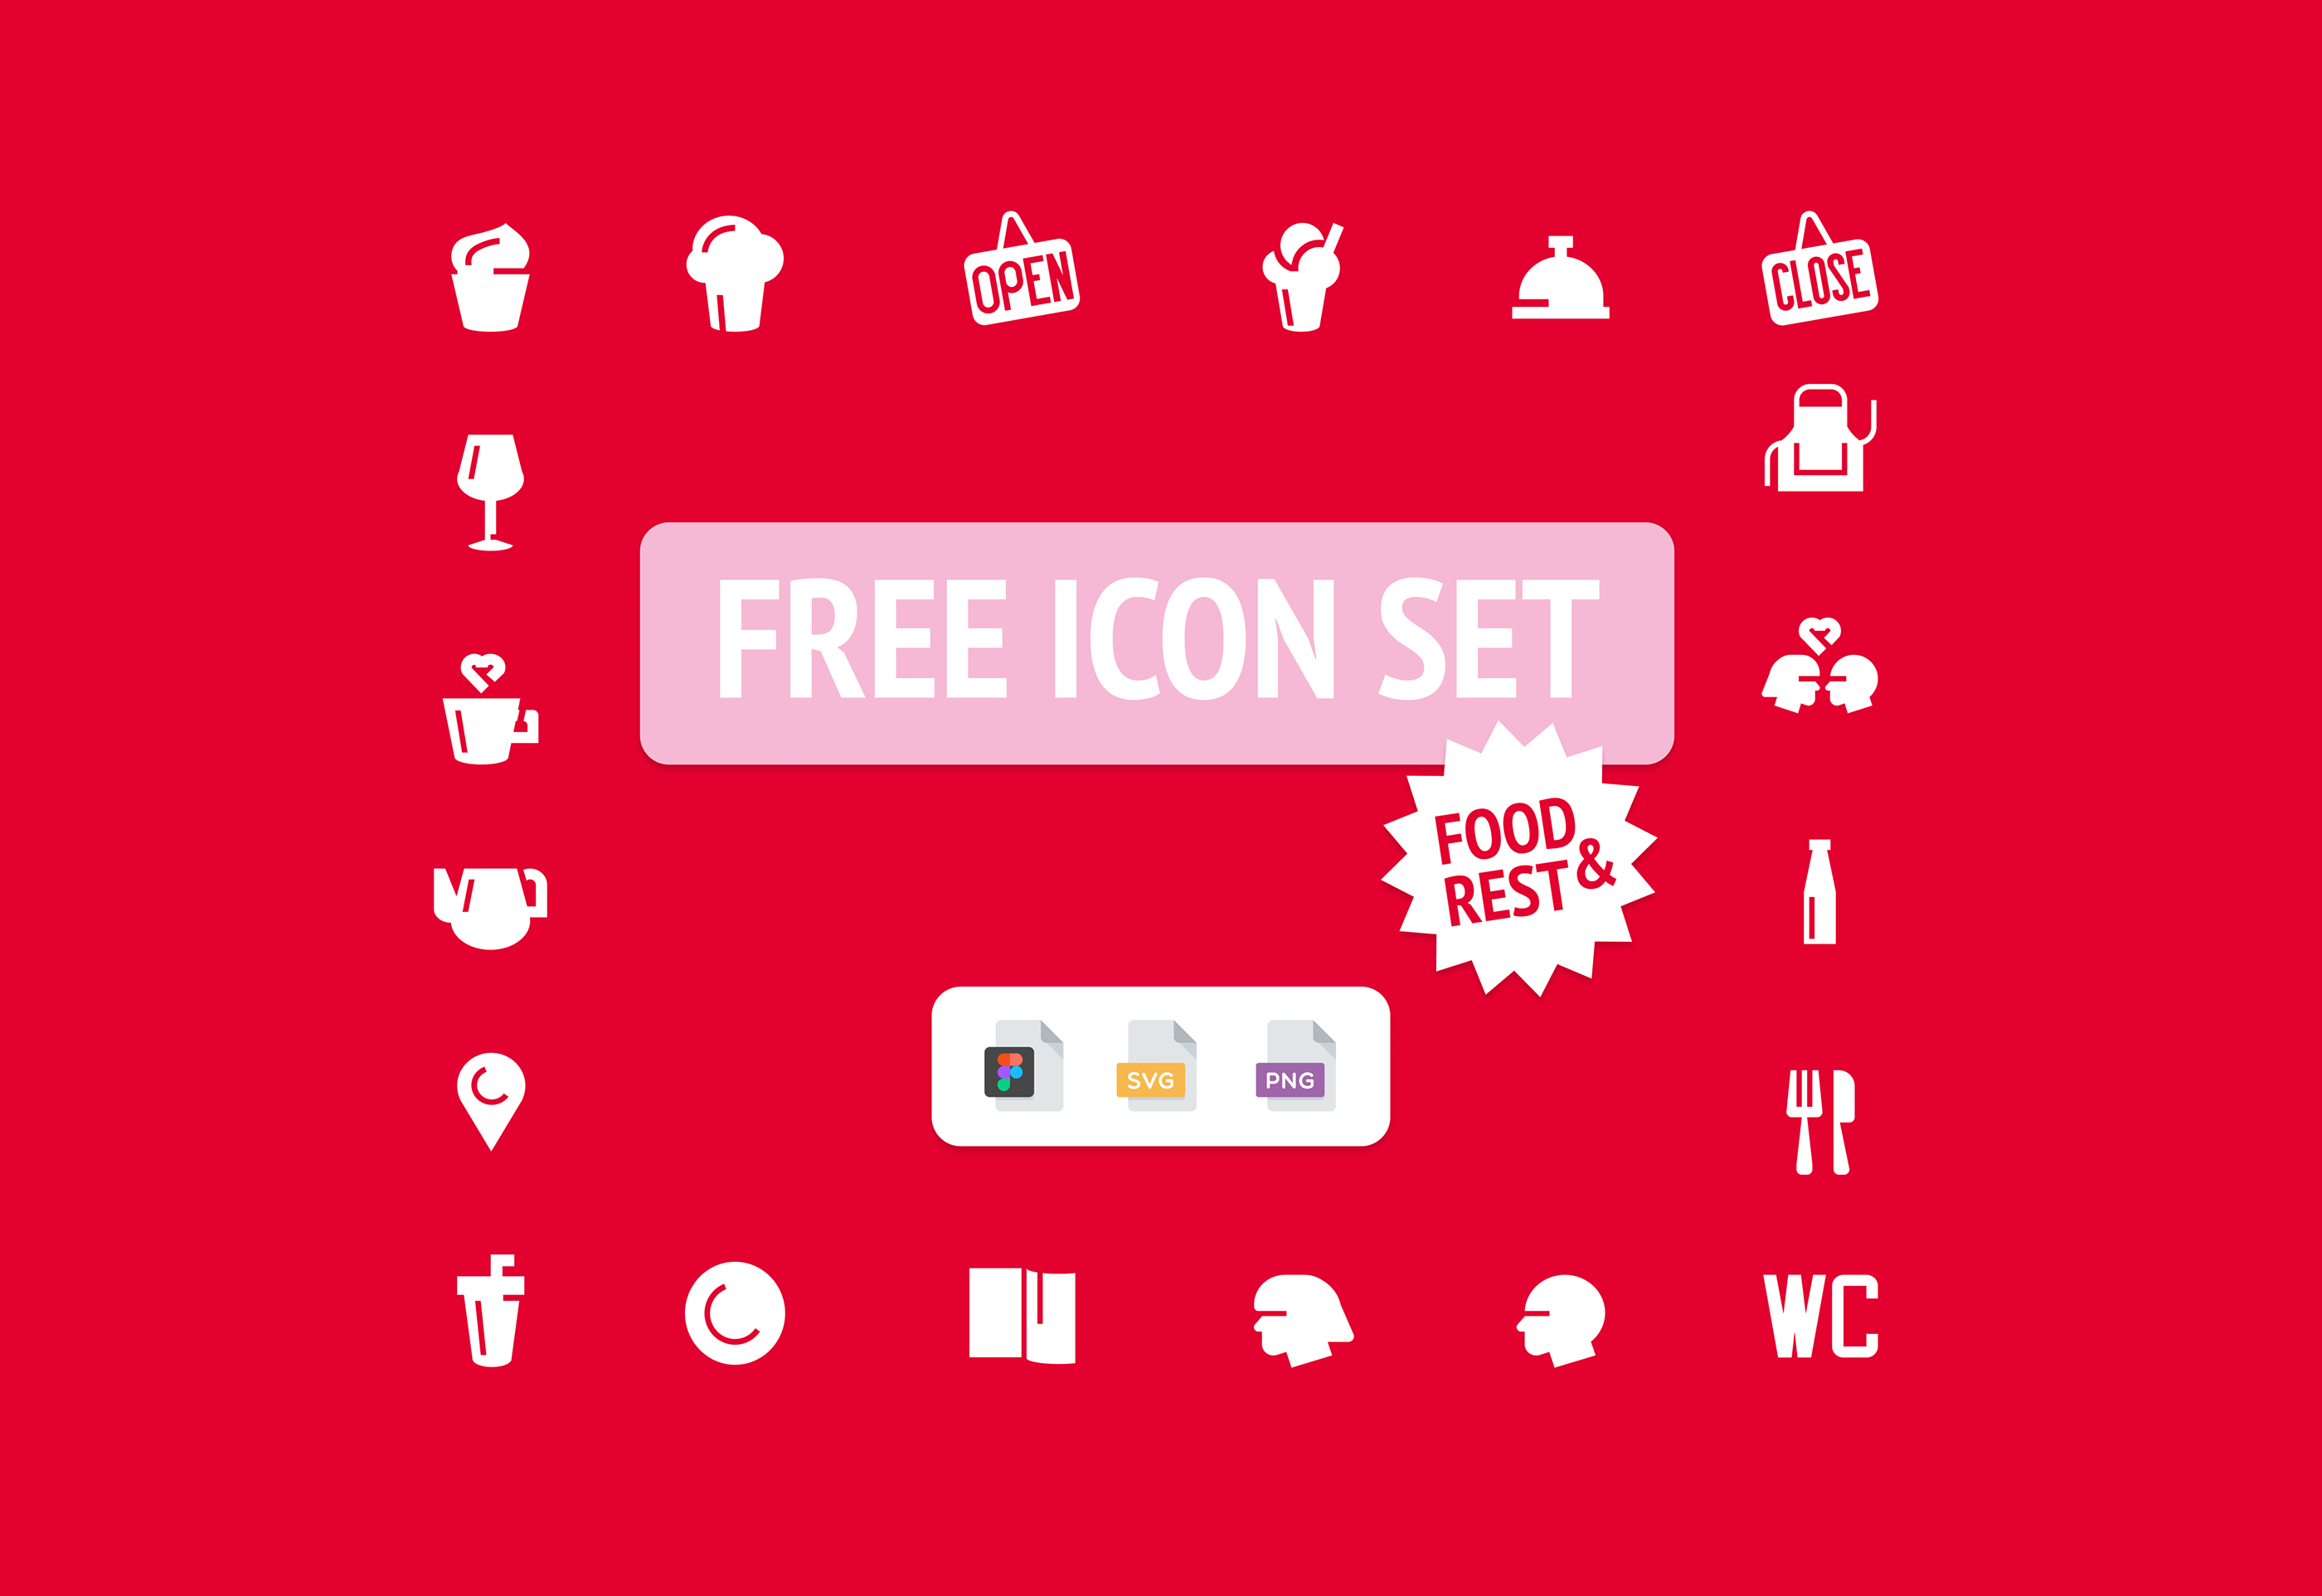 Freebies Graphics: 20 Food & Rest theme Icons Free Download